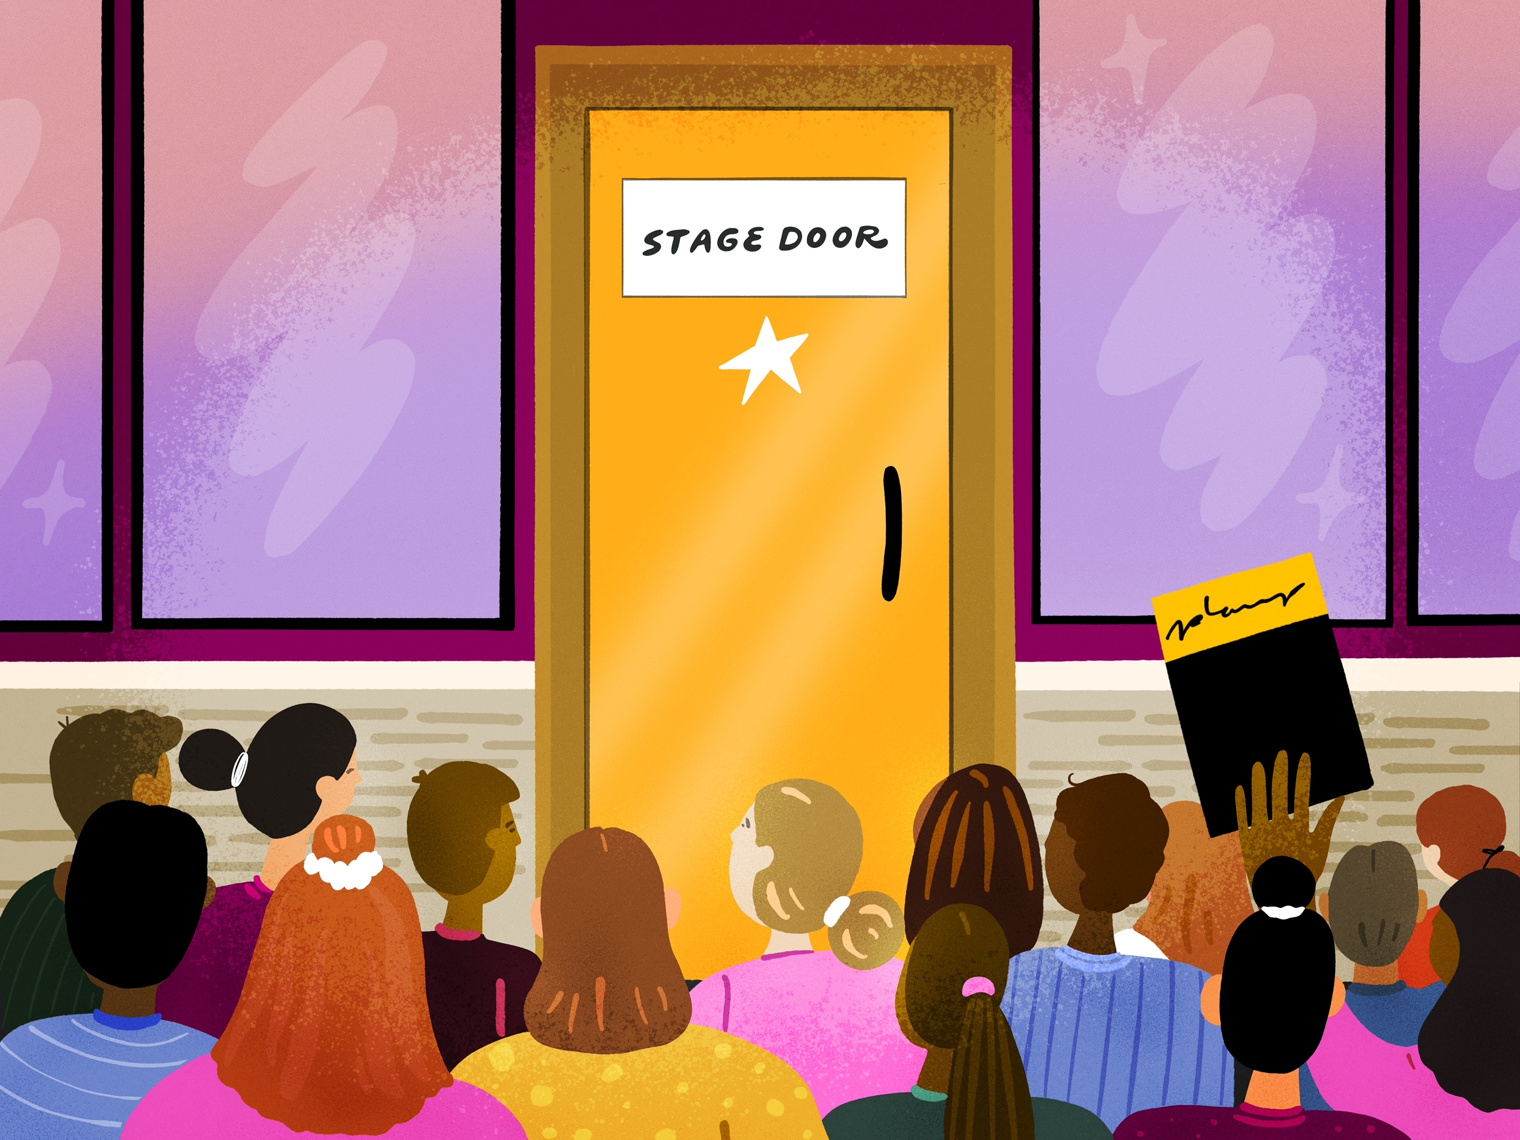 Illustration of a Broadway stage door with people waiting outside.